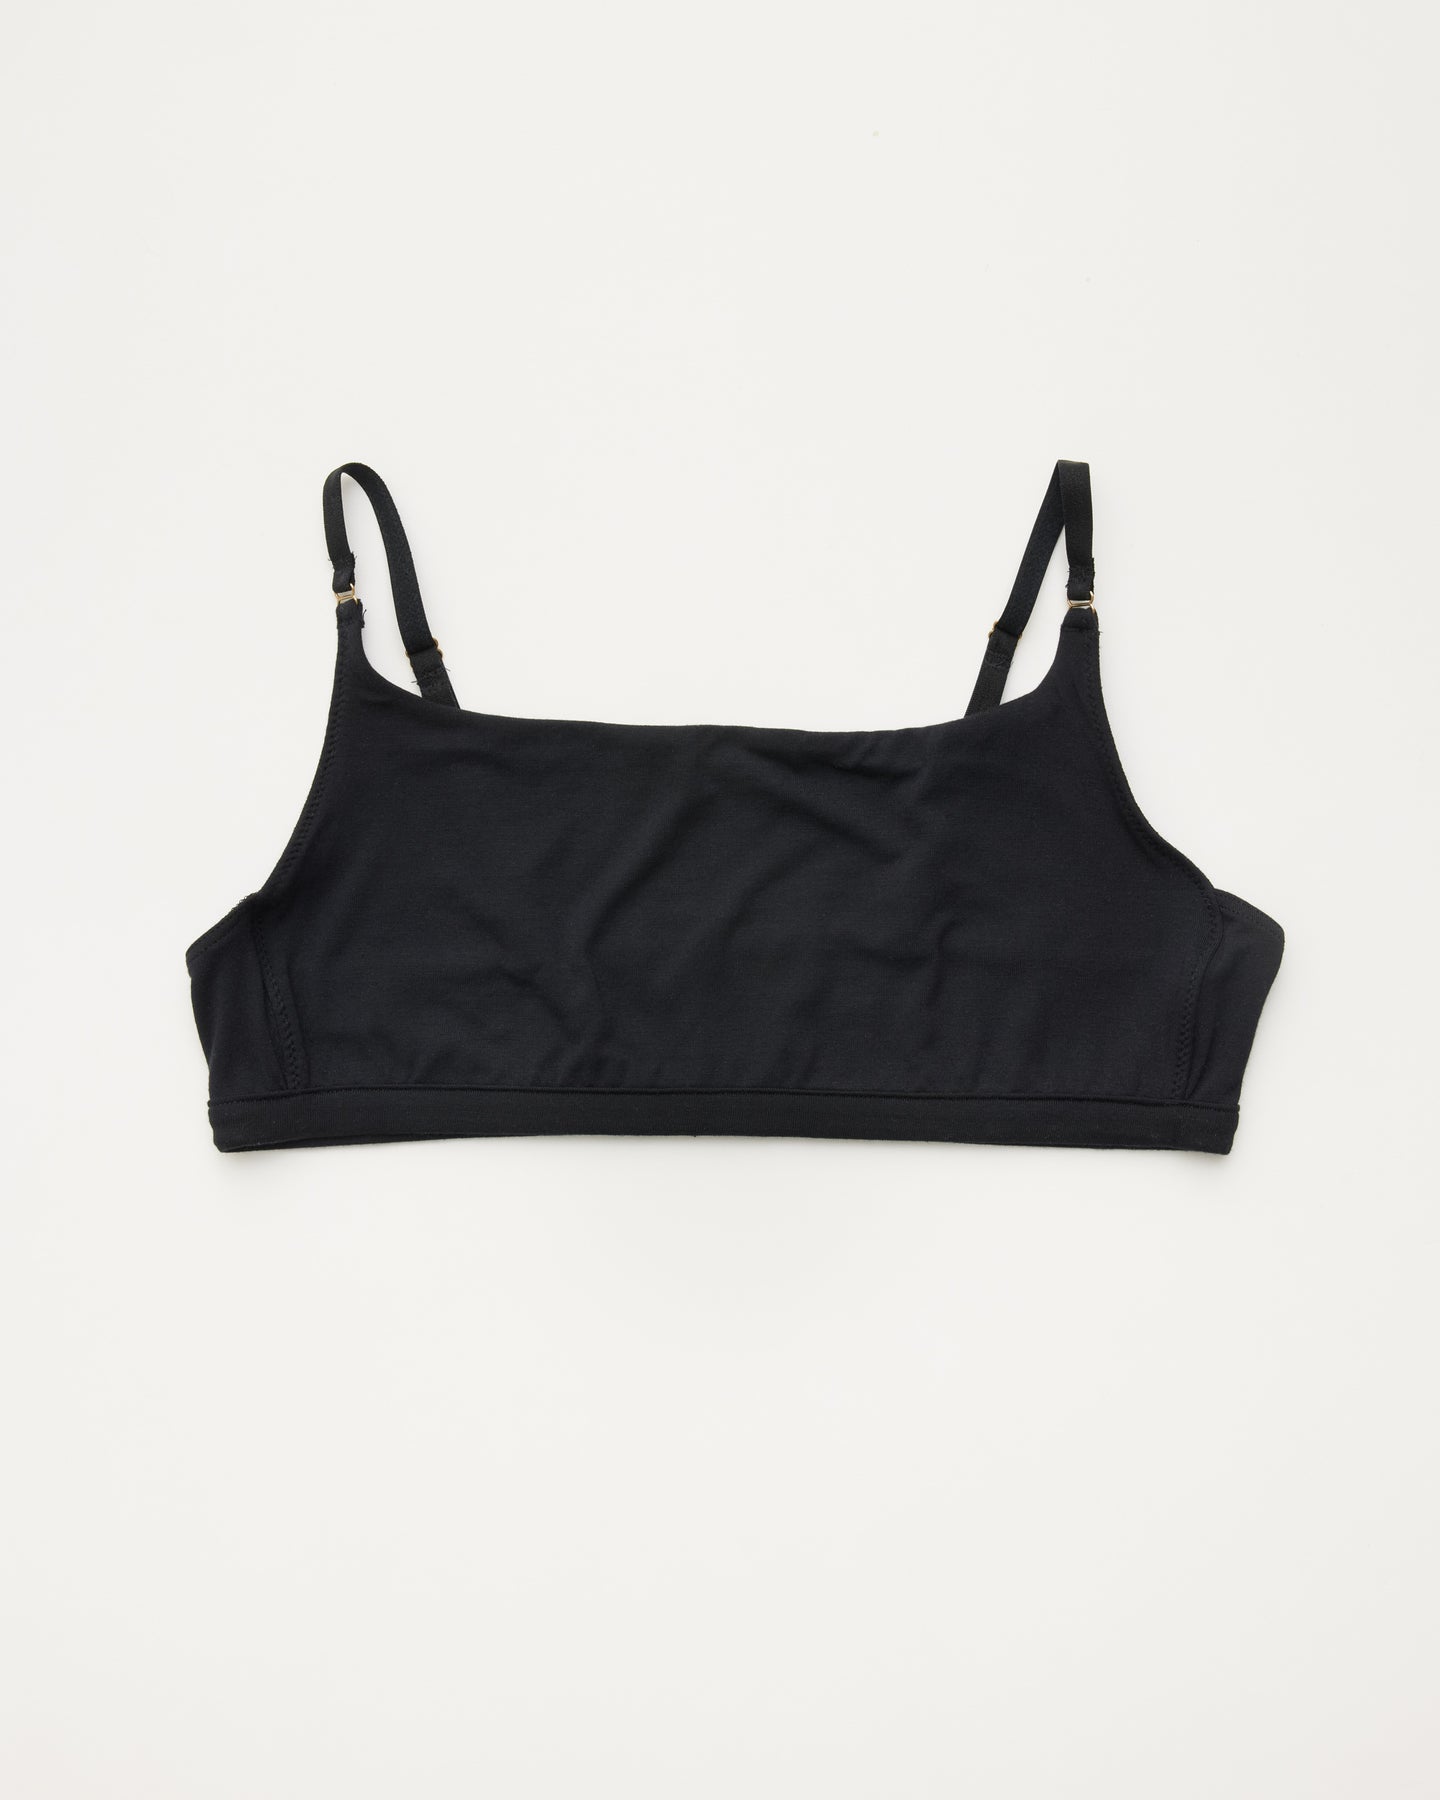 Sustainable Underwear | Ethical Affordable Organic Cotton Bras